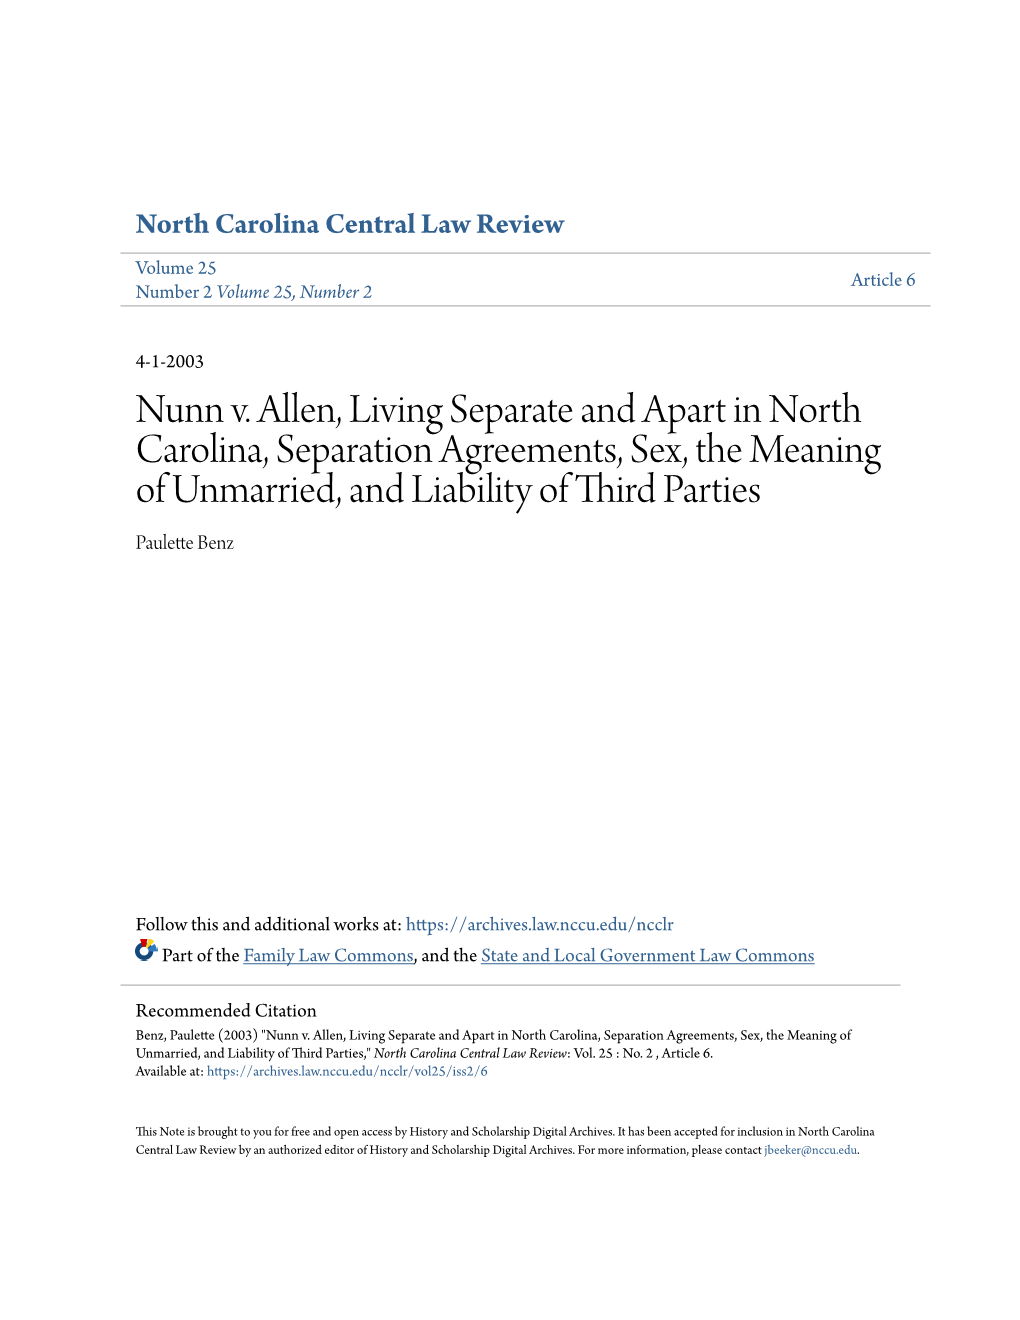 Nunn V. Allen, Living Separate and Apart in North Carolina, Separation Agreements, Sex, the Meaning of Unmarried, and Liability of Third Parties Paulette Benz